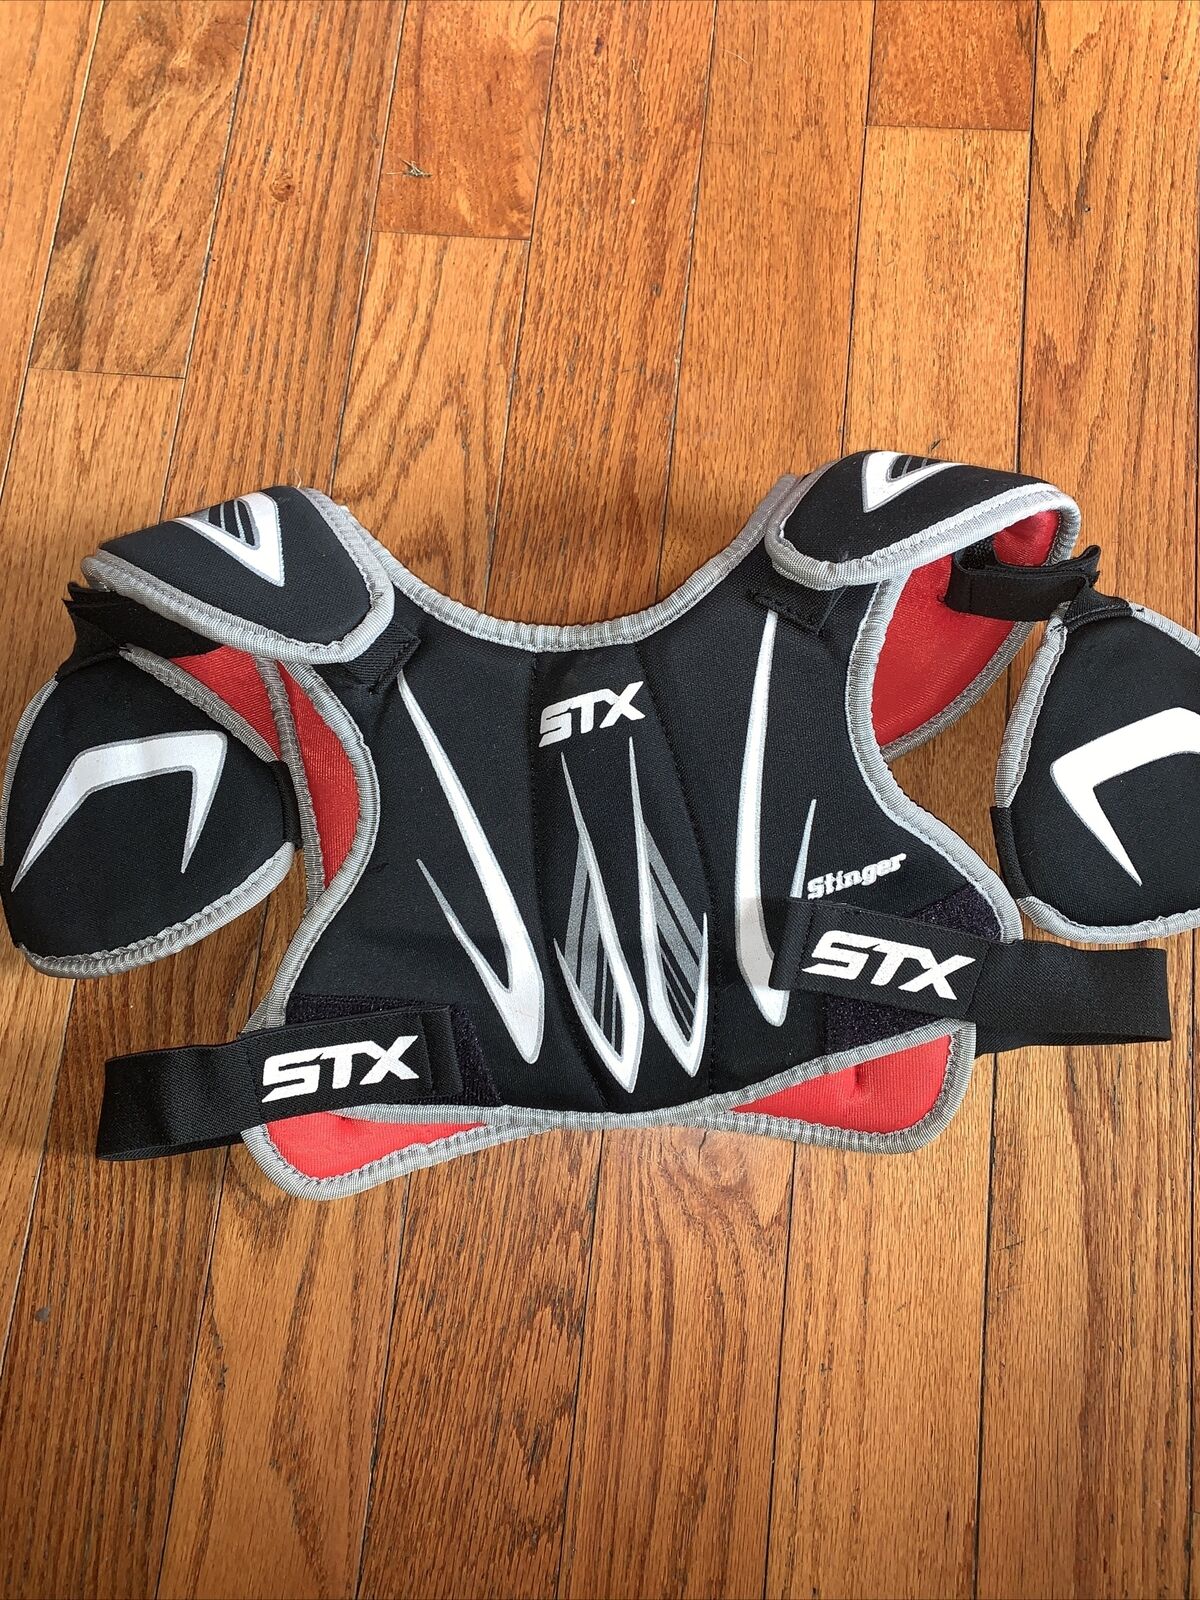 Stx Stinger Lacrosse Shoulder Pads Youth Small